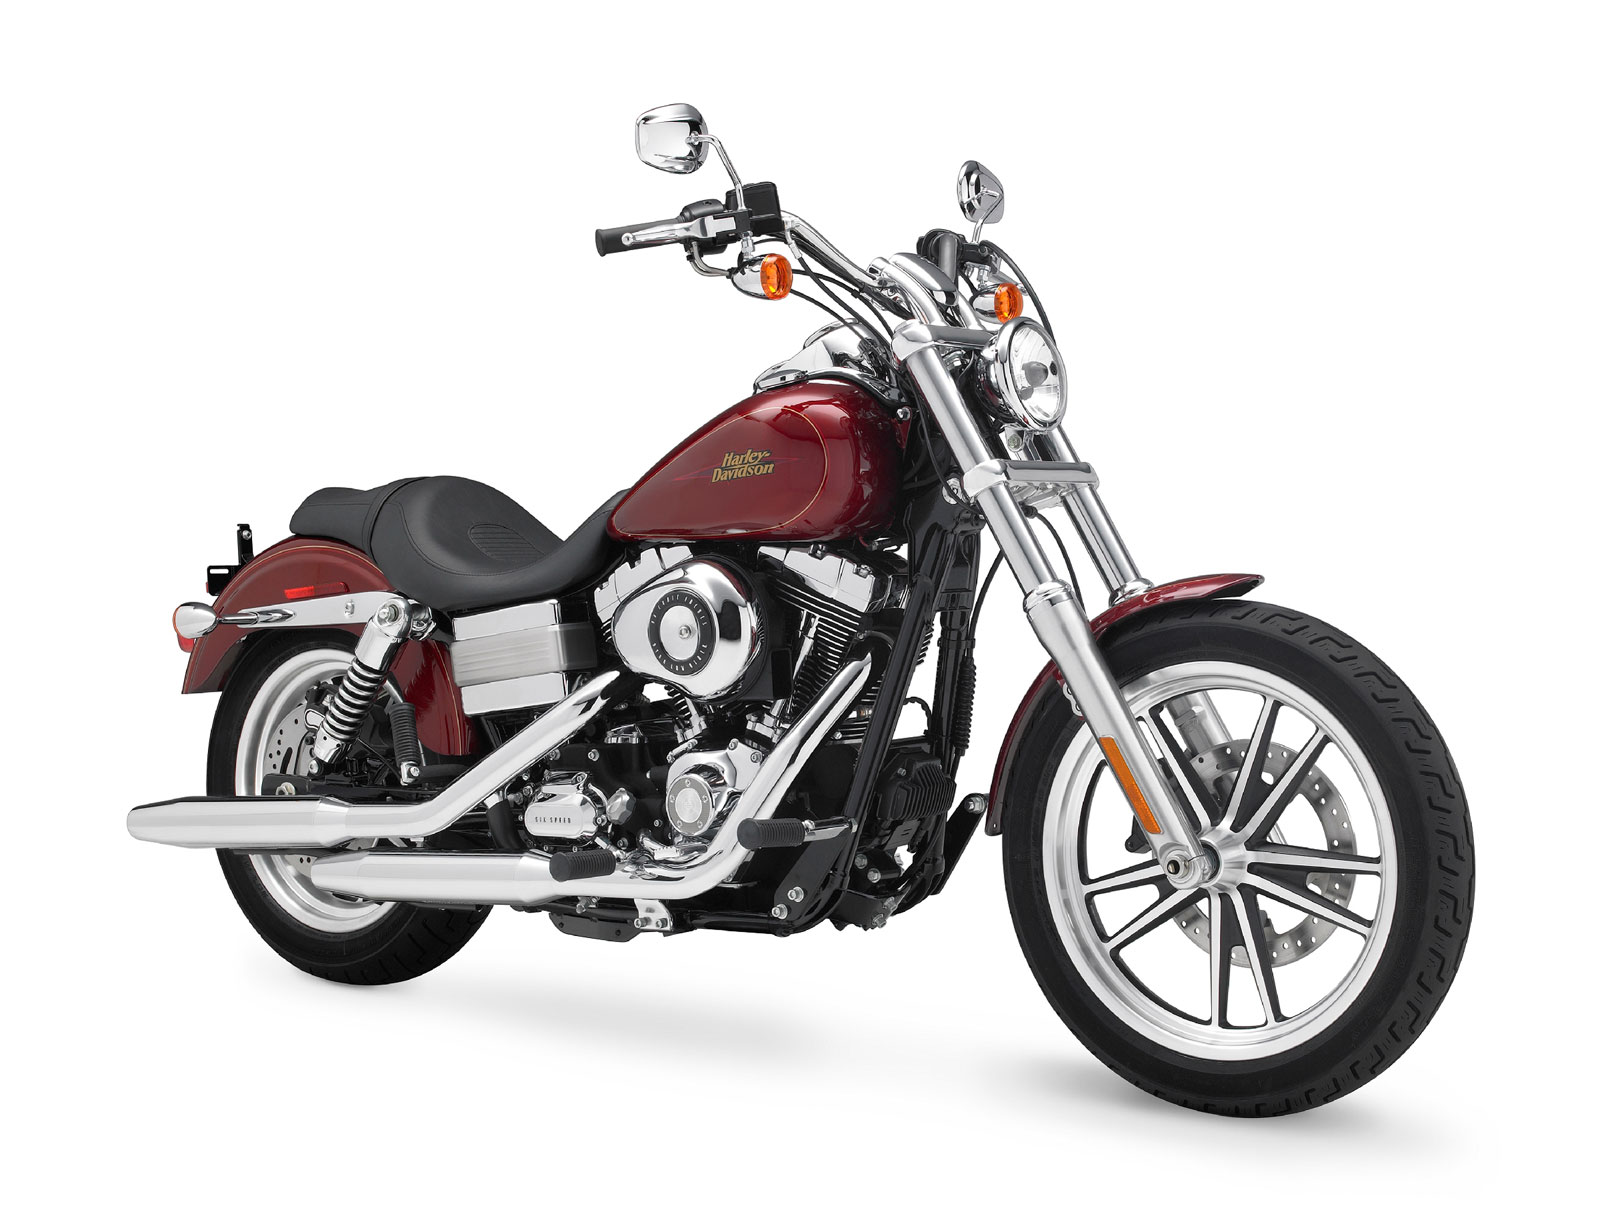 2009 Harley Davidson Dyna Low Rider All About Motorcycle Honda